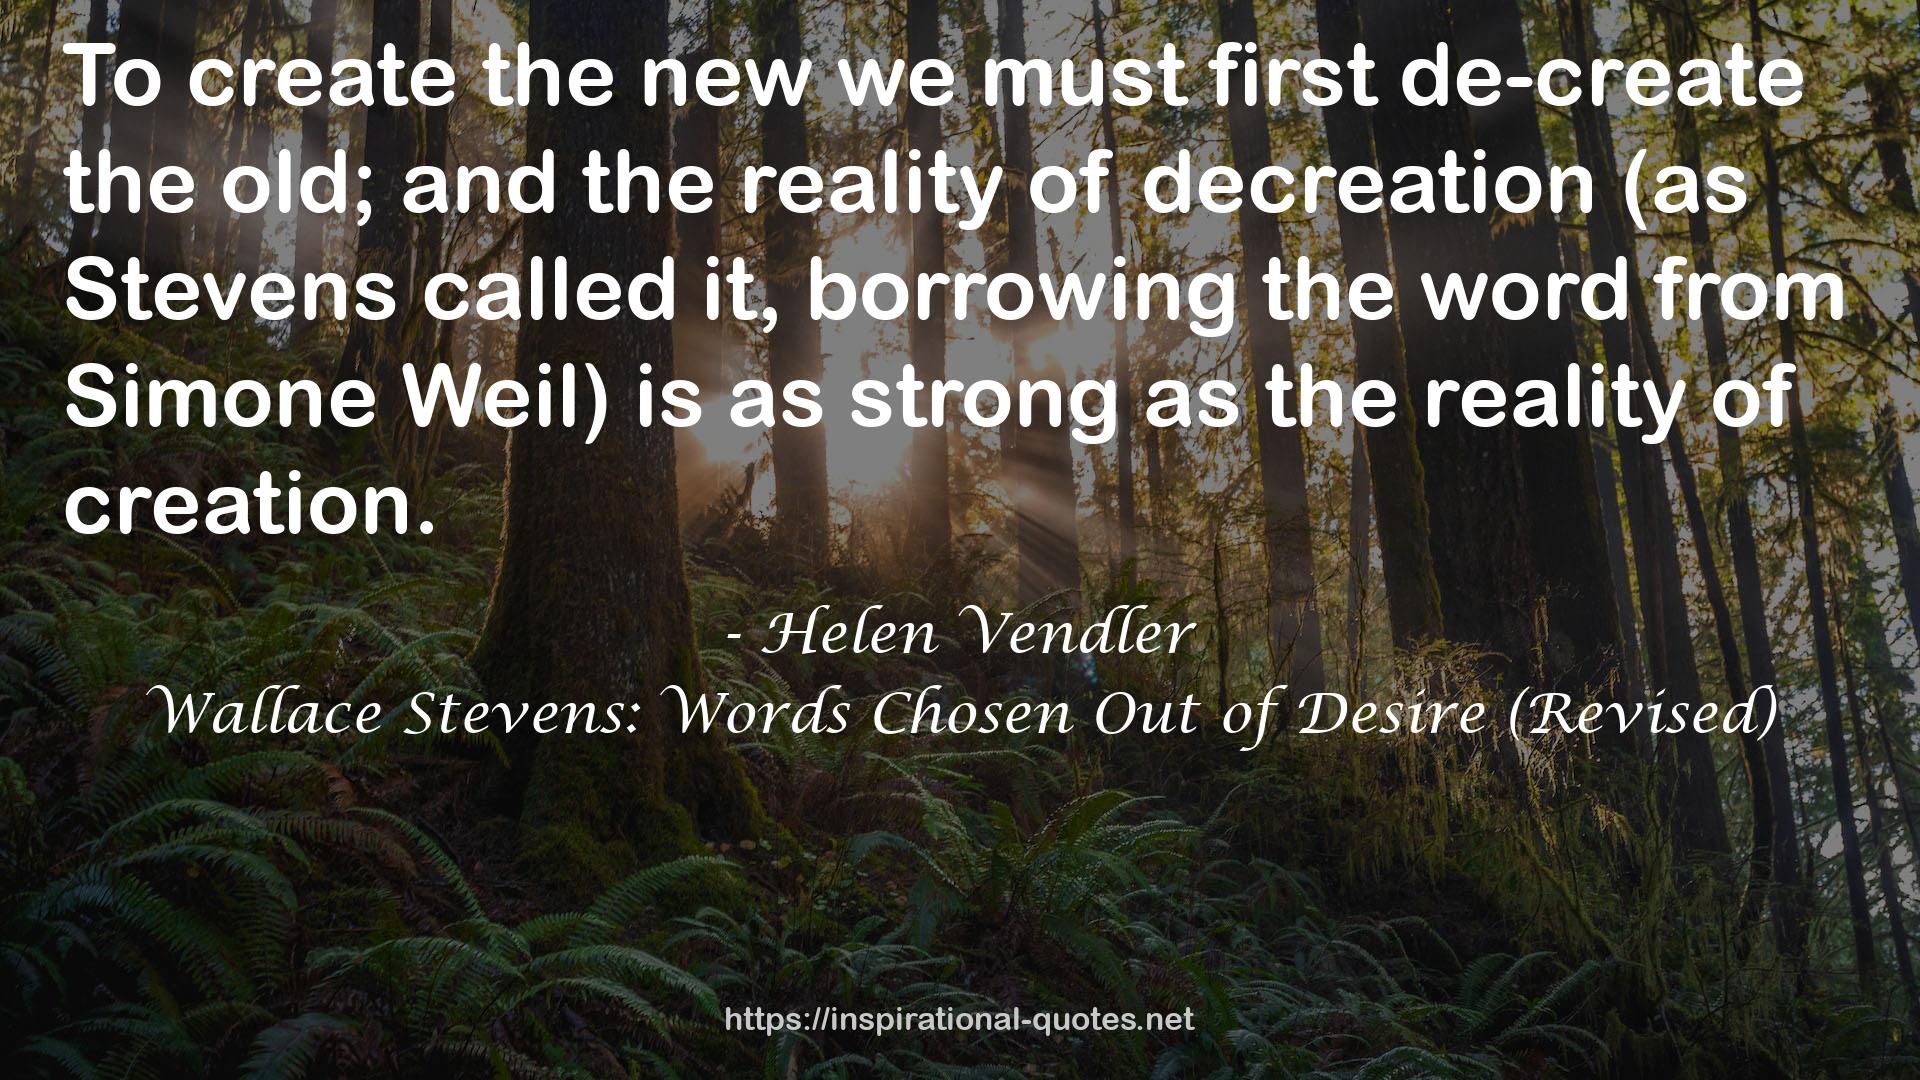 Wallace Stevens: Words Chosen Out of Desire (Revised) QUOTES